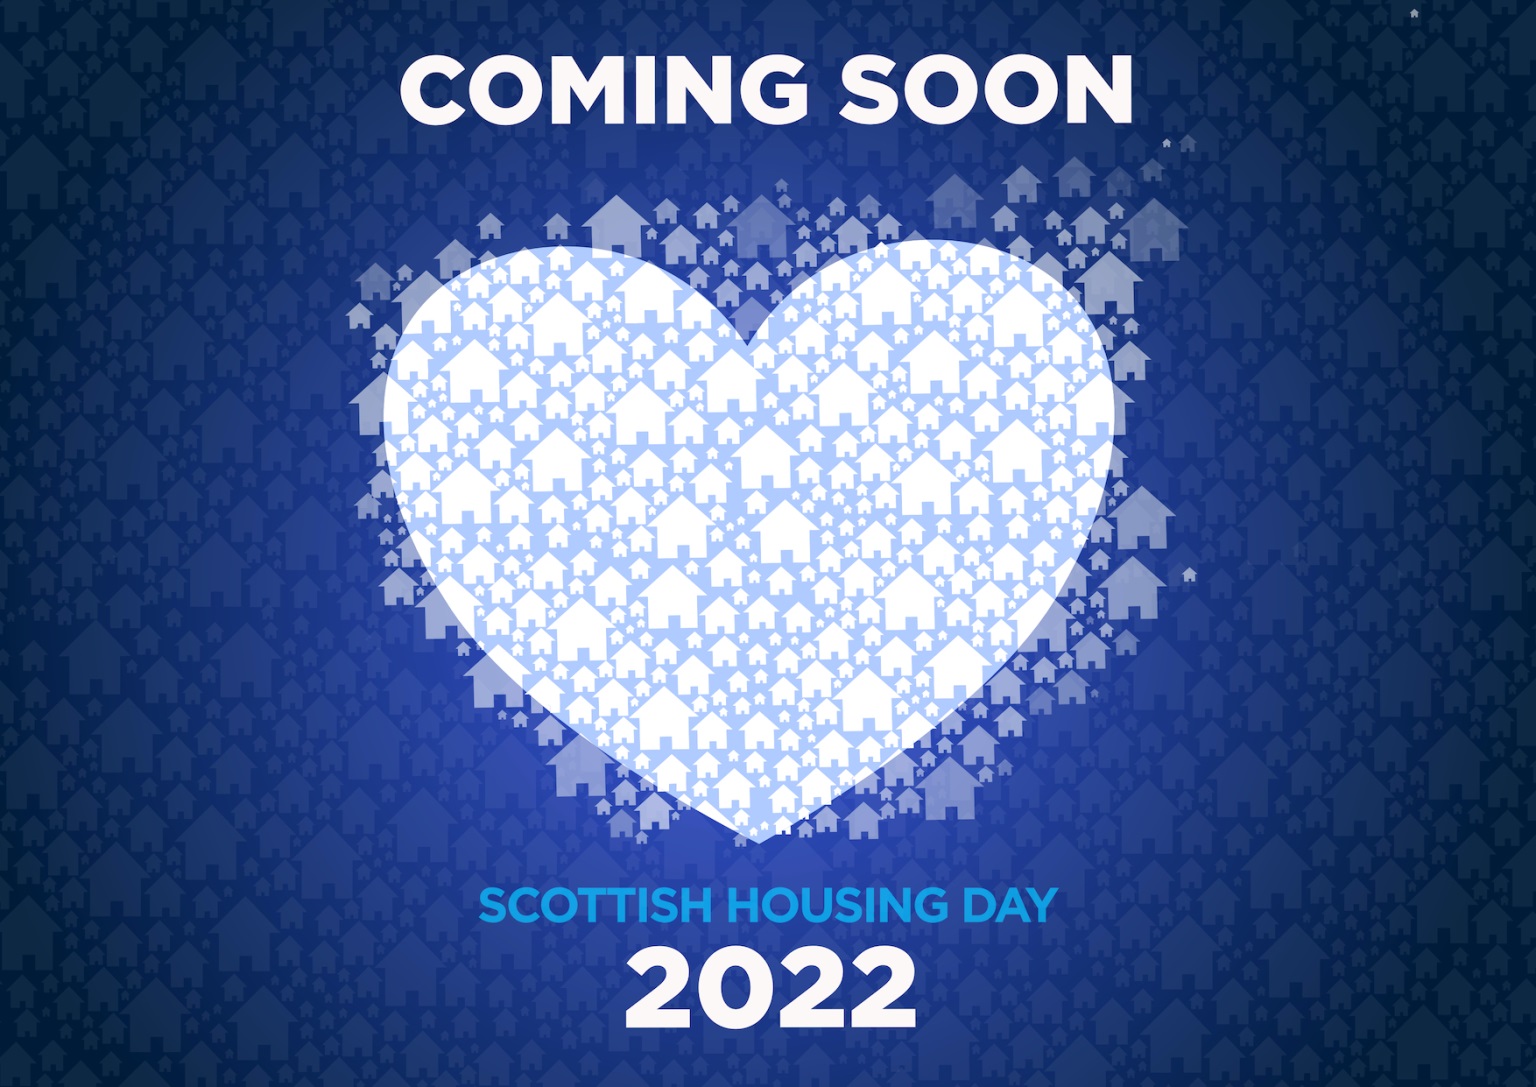 Save the date issued for Scottish Housing Day 2022